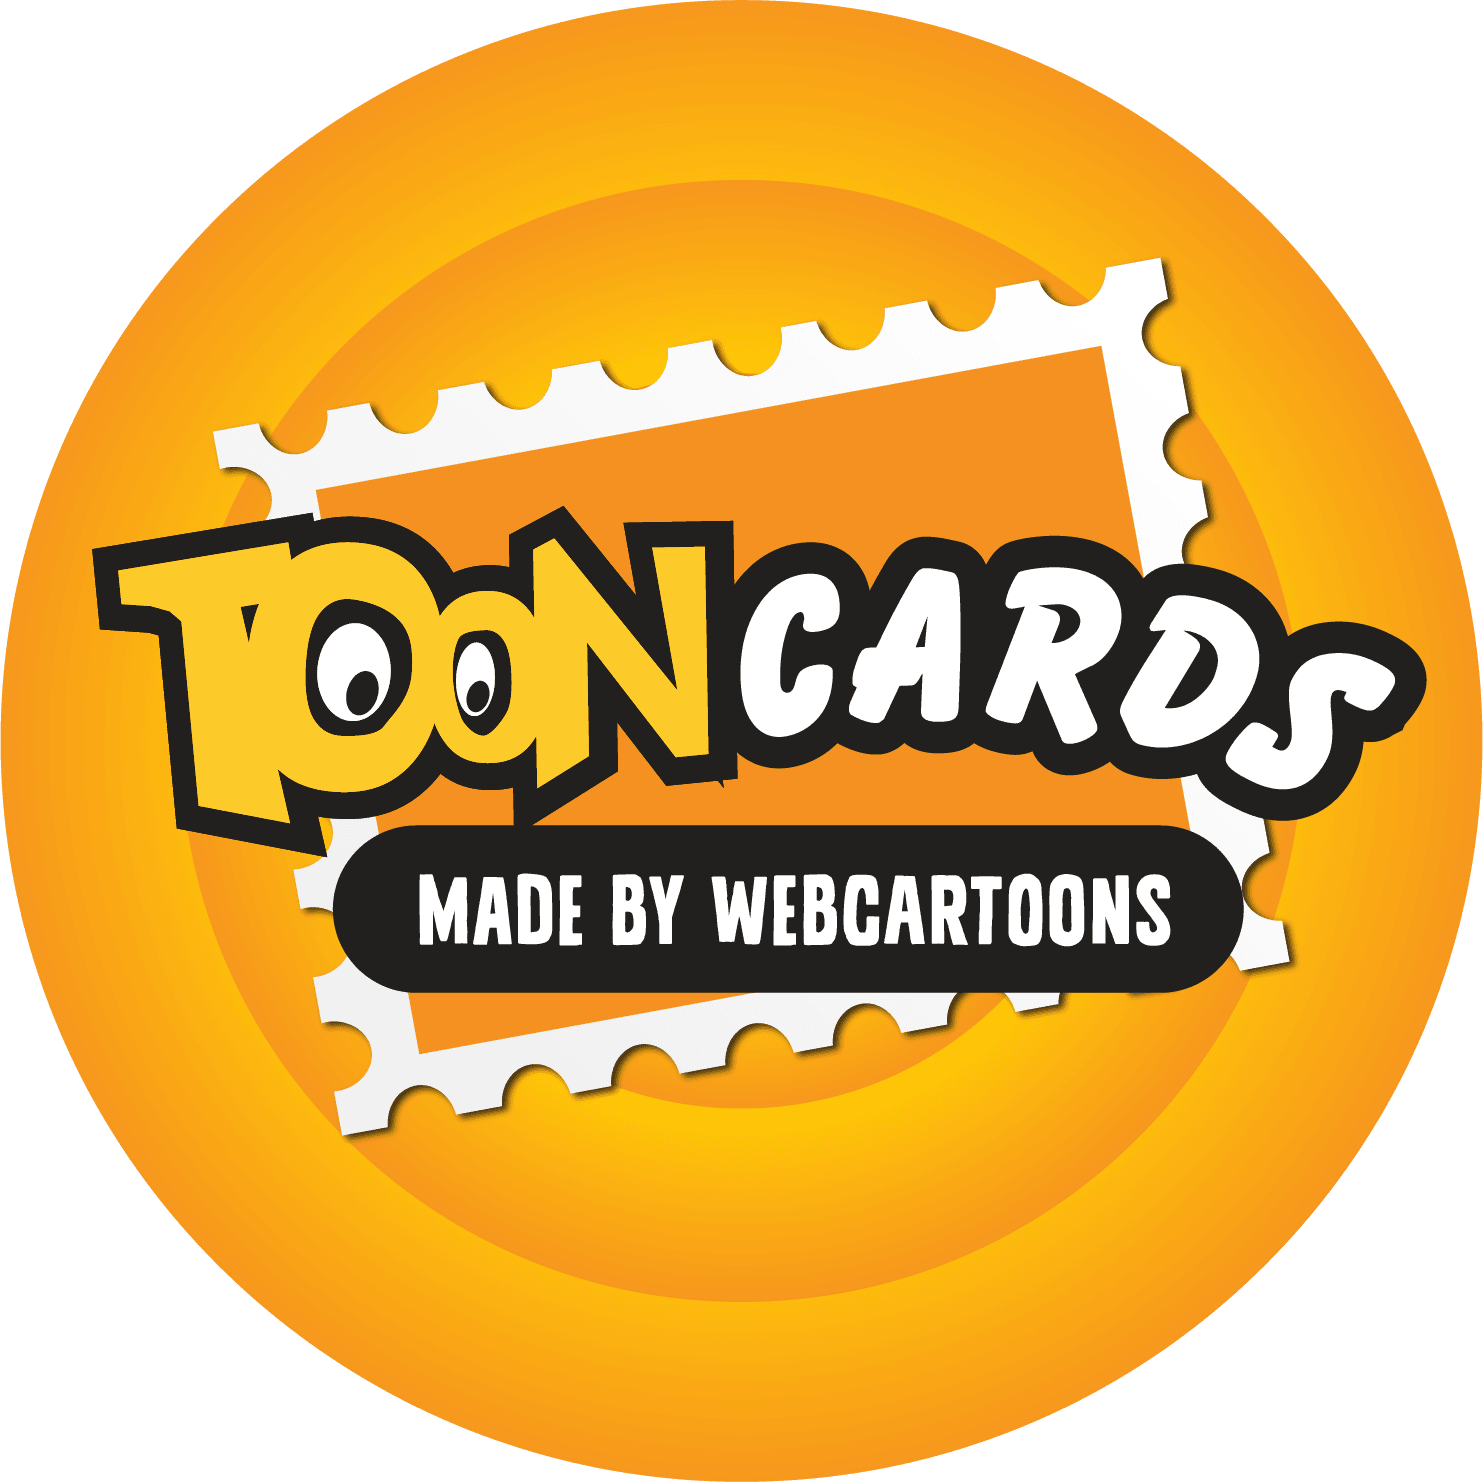 ToonCards